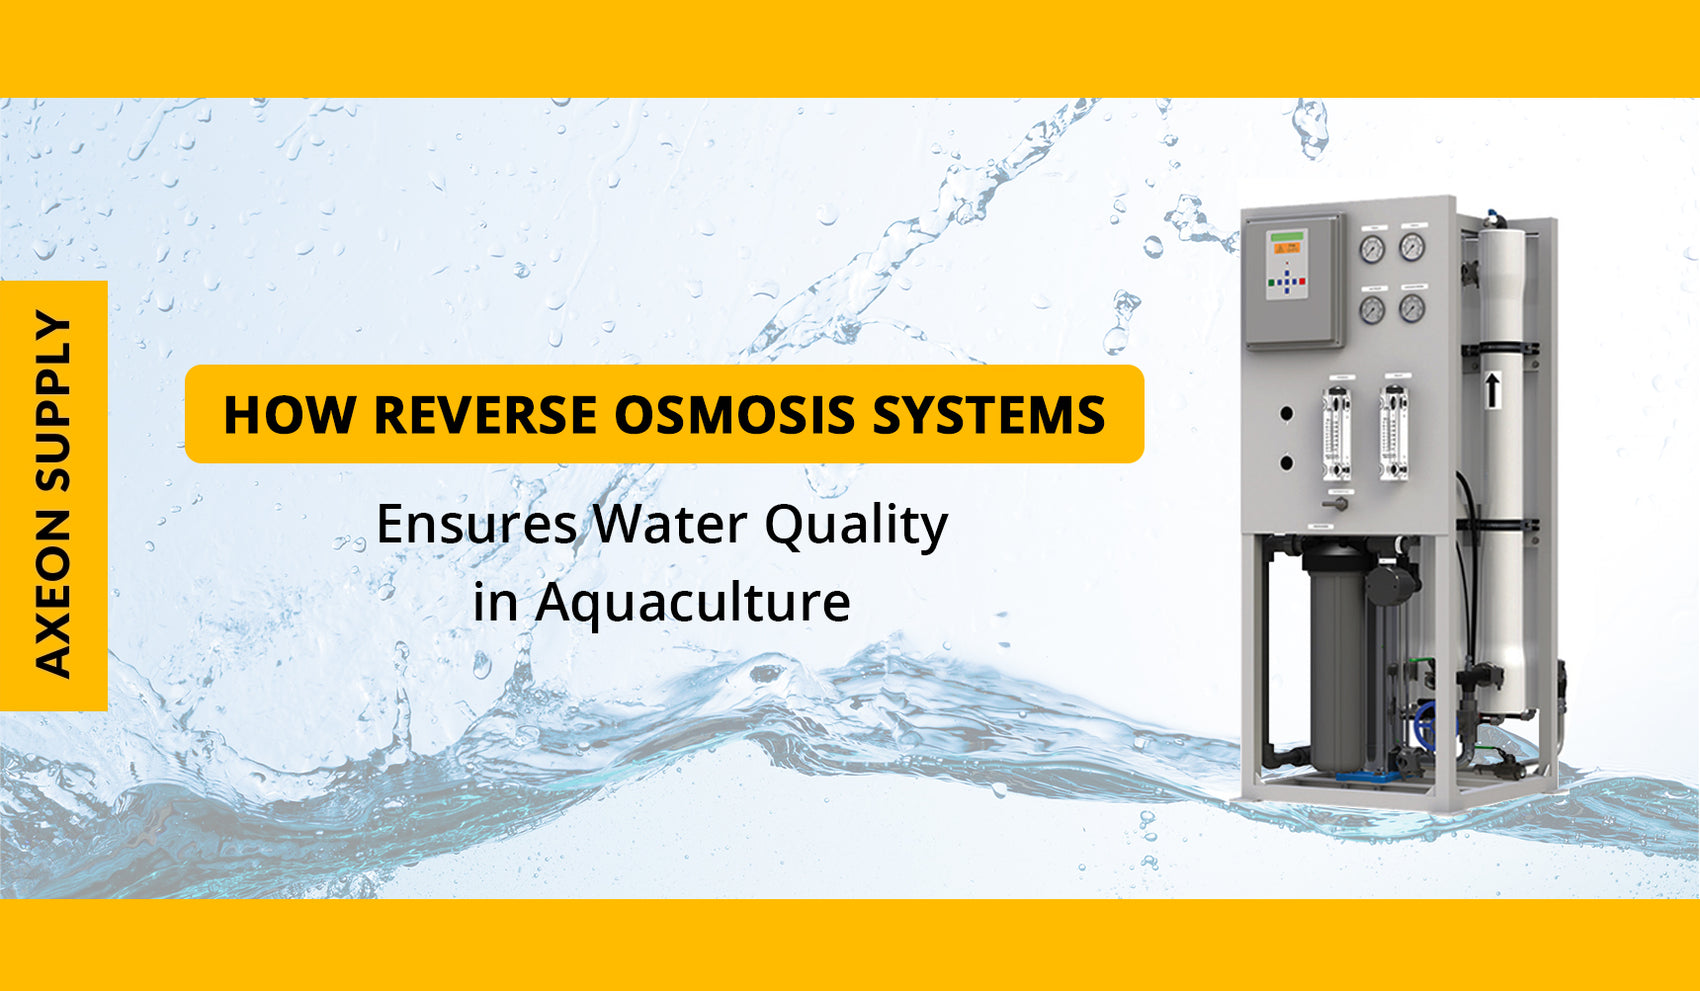 How Reverse Osmosis Systems Ensures Water Quality in Aquaculture